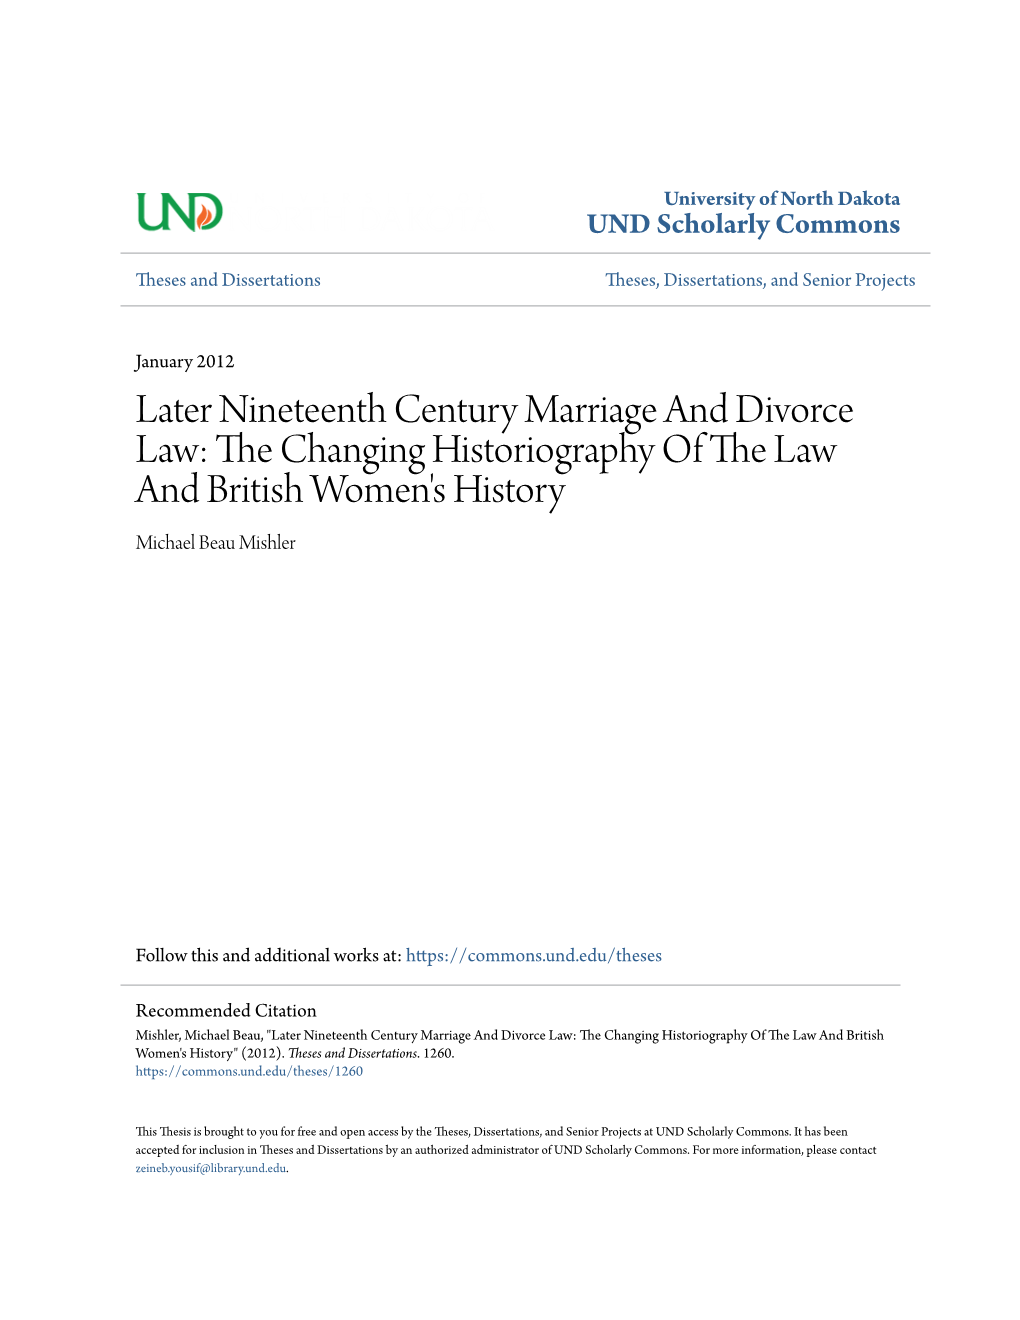 Later Nineteenth Century Marriage and Divorce Law: the Hc Anging Historiography of the Law and British Women's History Michael Beau Mishler